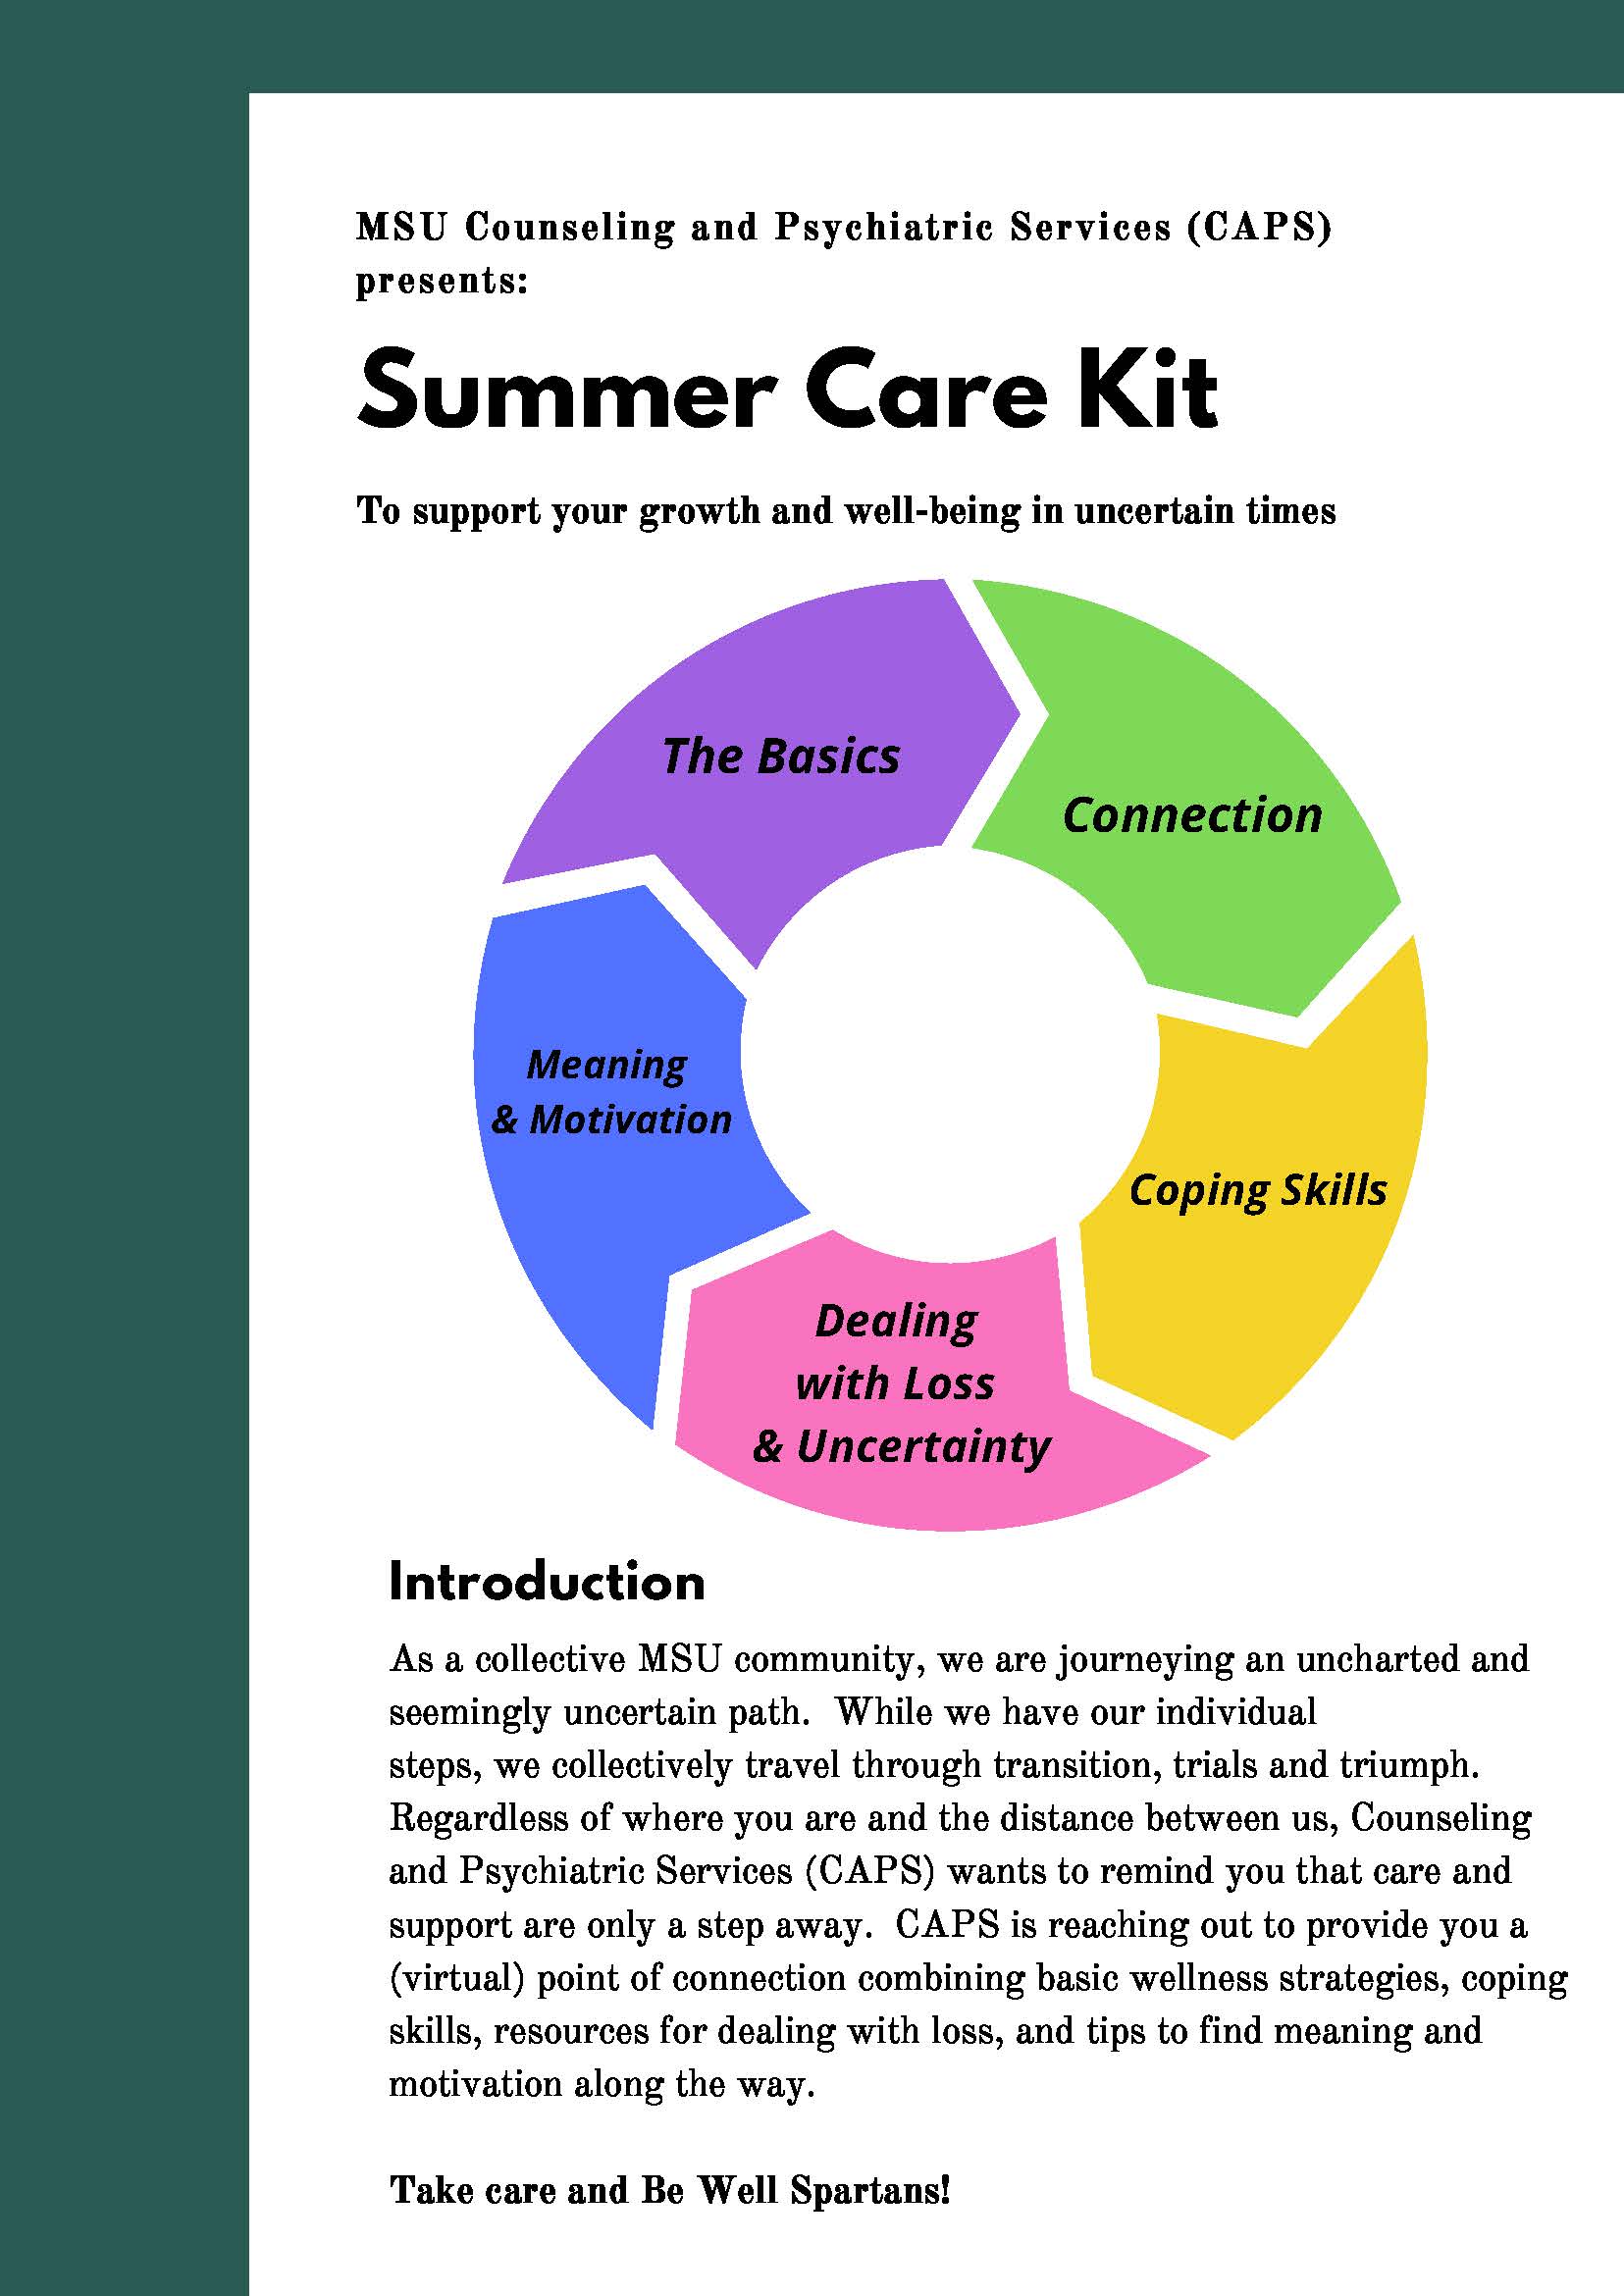 Taking Care of your Self This Summer: A Care Kit for You